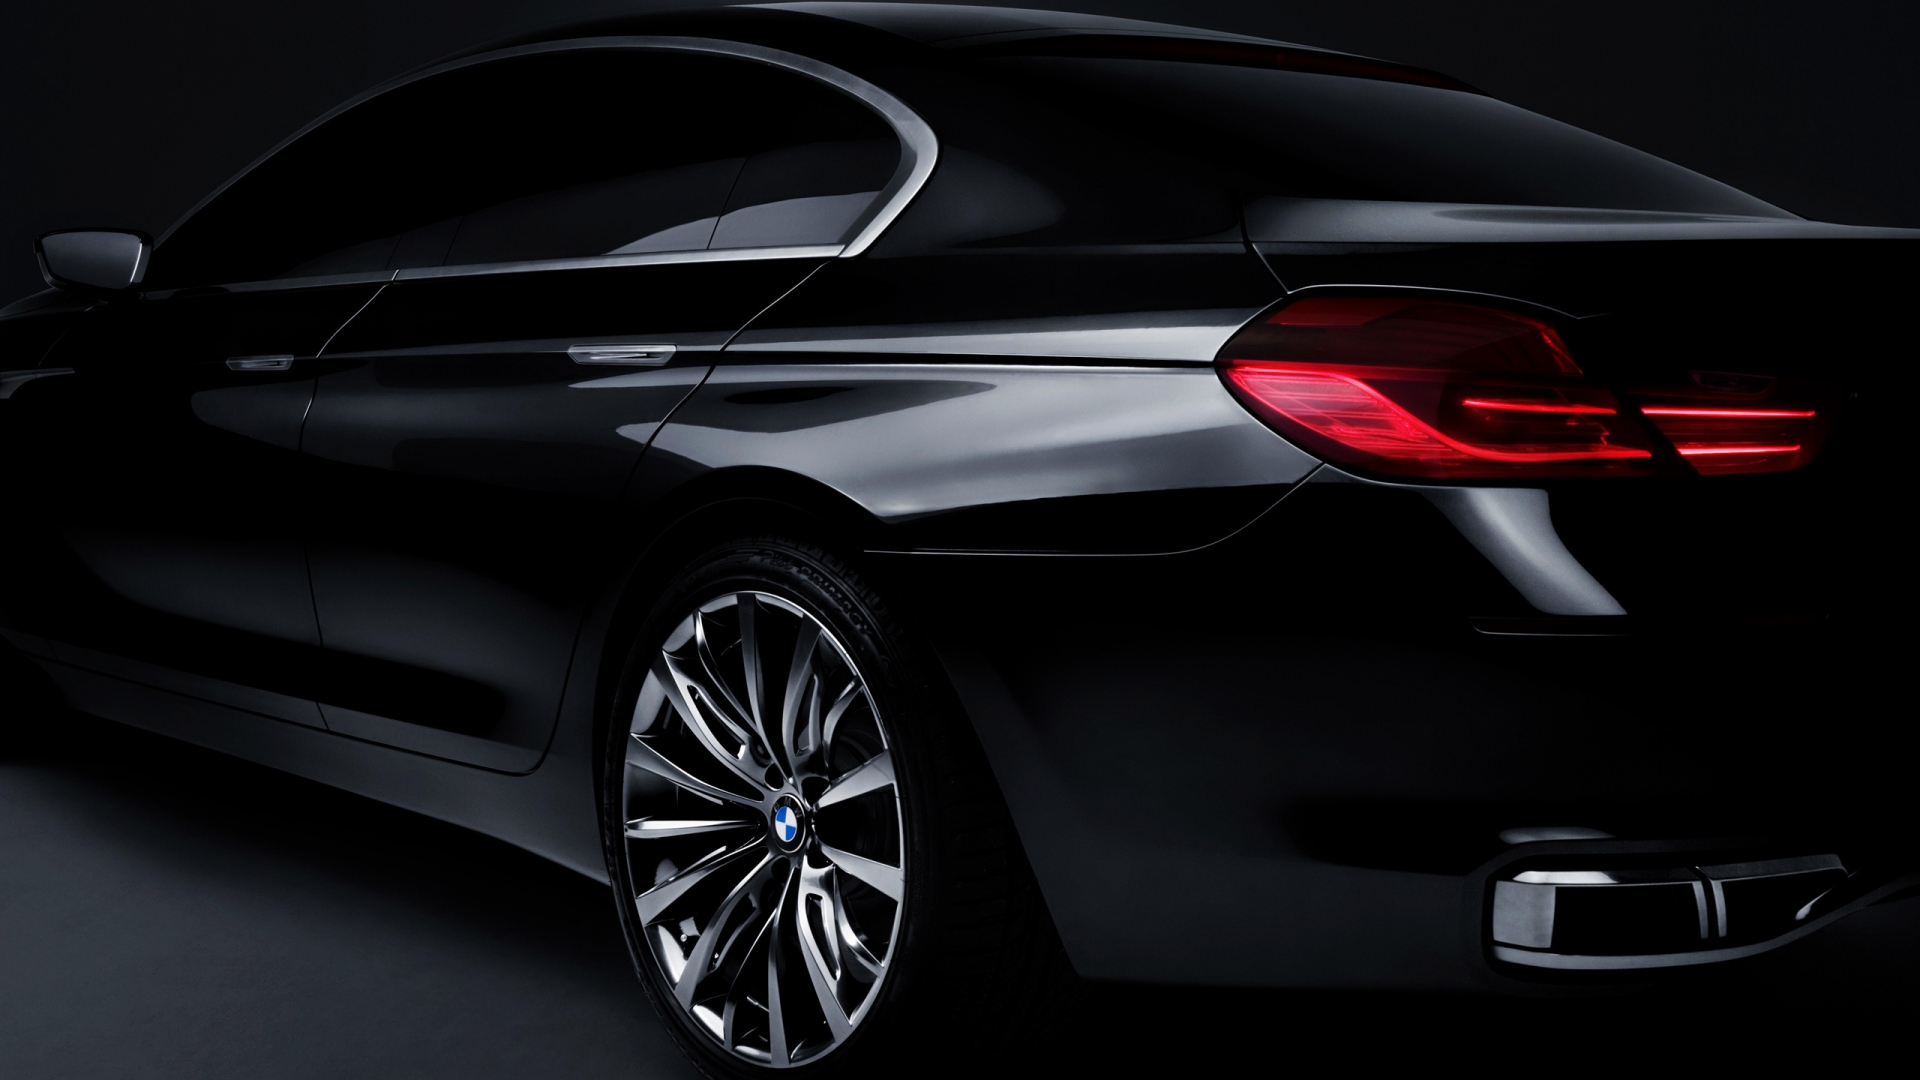 BMW Concept Gran Coupe Rear for 1920 x 1080 HDTV 1080p resolution